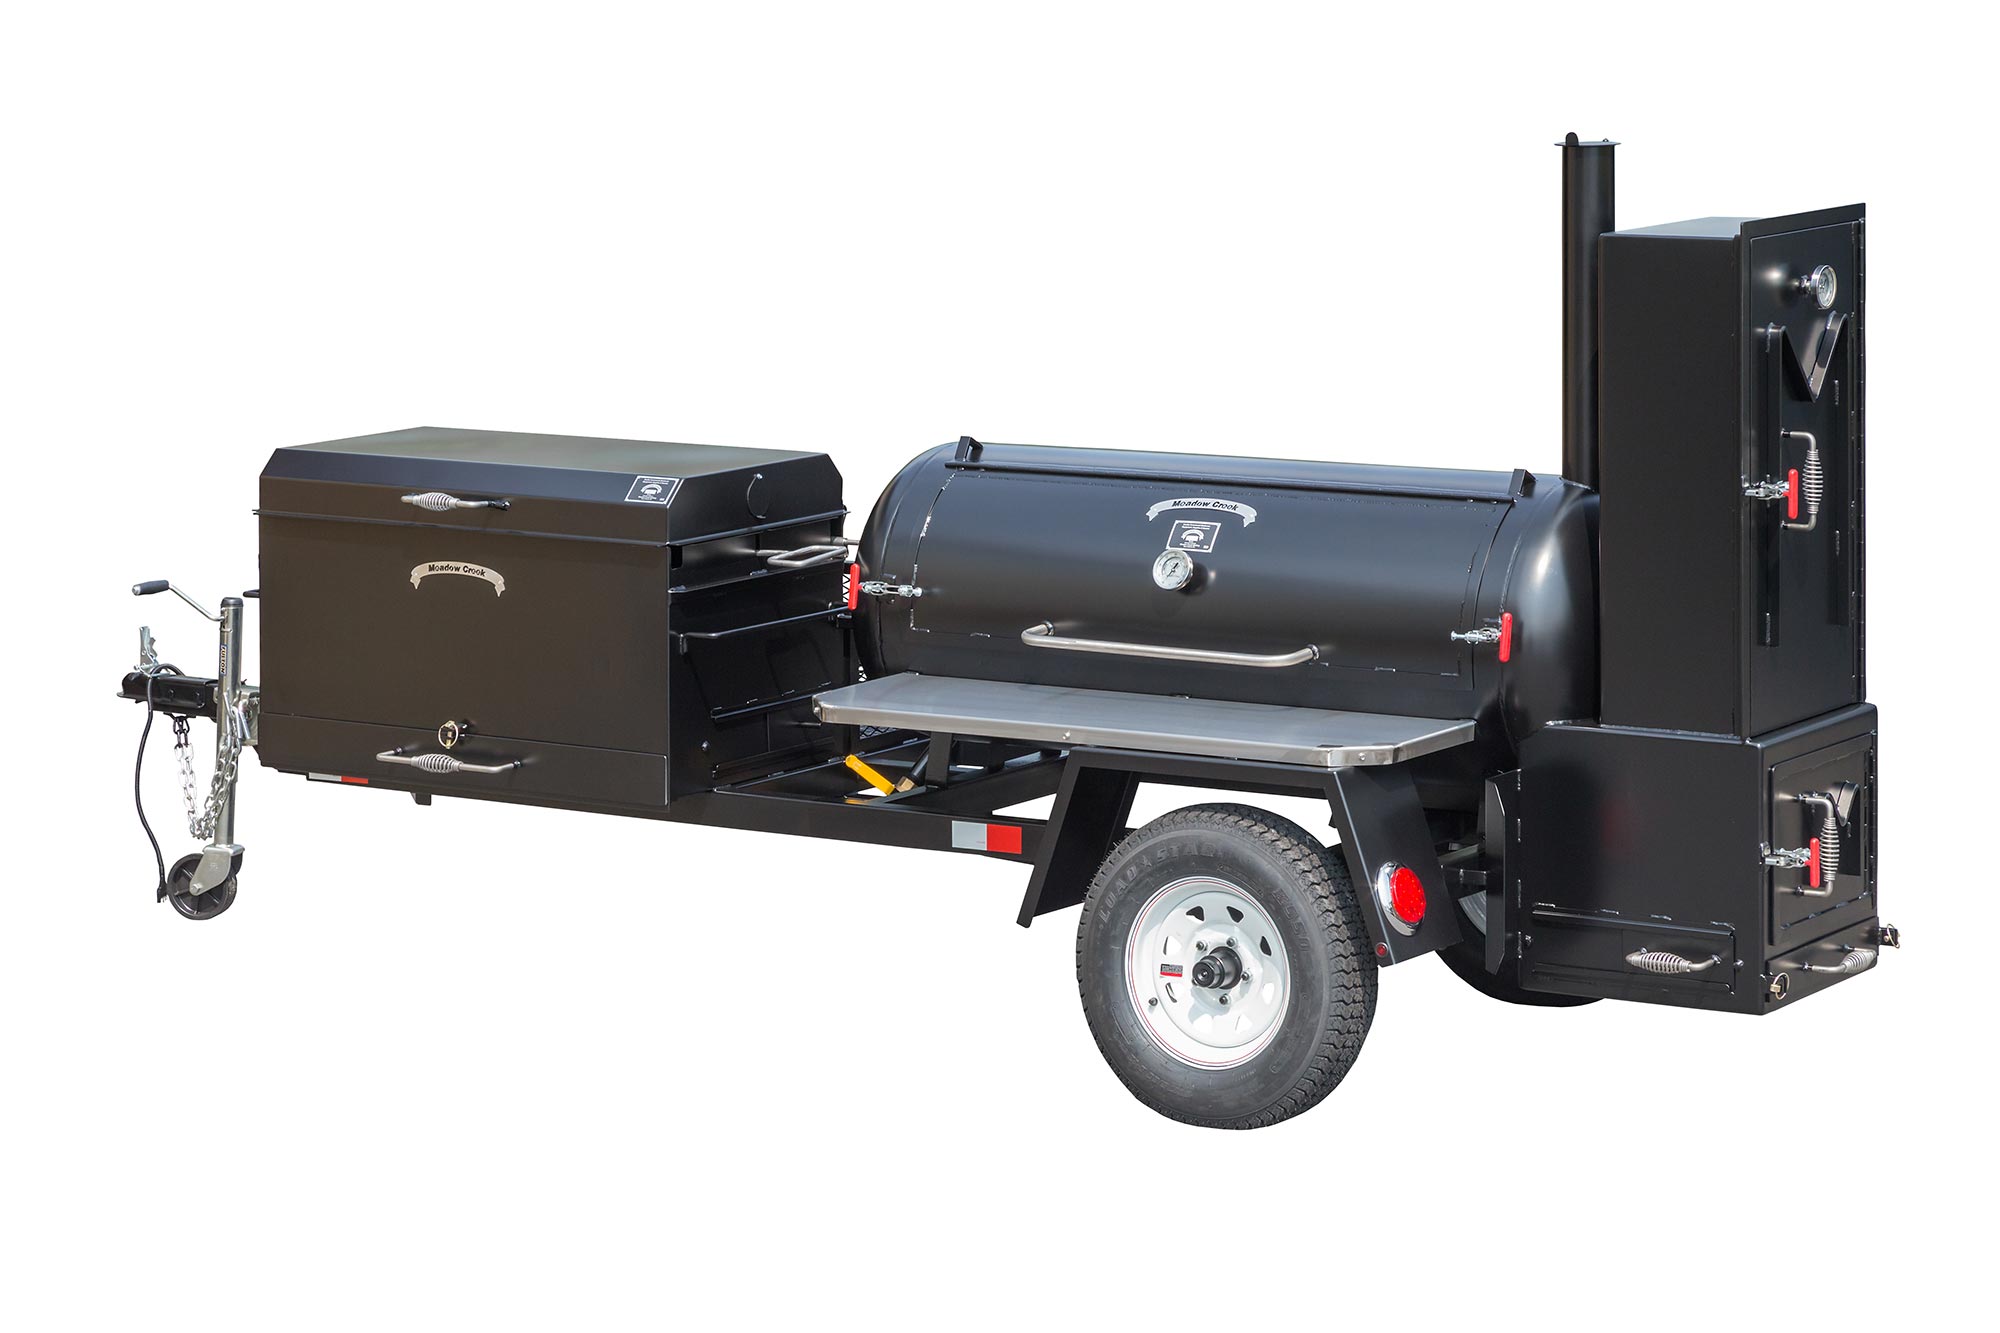 TS120 Tank Smoker Trailer With Optional Stainless Steel Exterior Shelves and BBQ42 Chicken Cooker With Charcoal Pullout